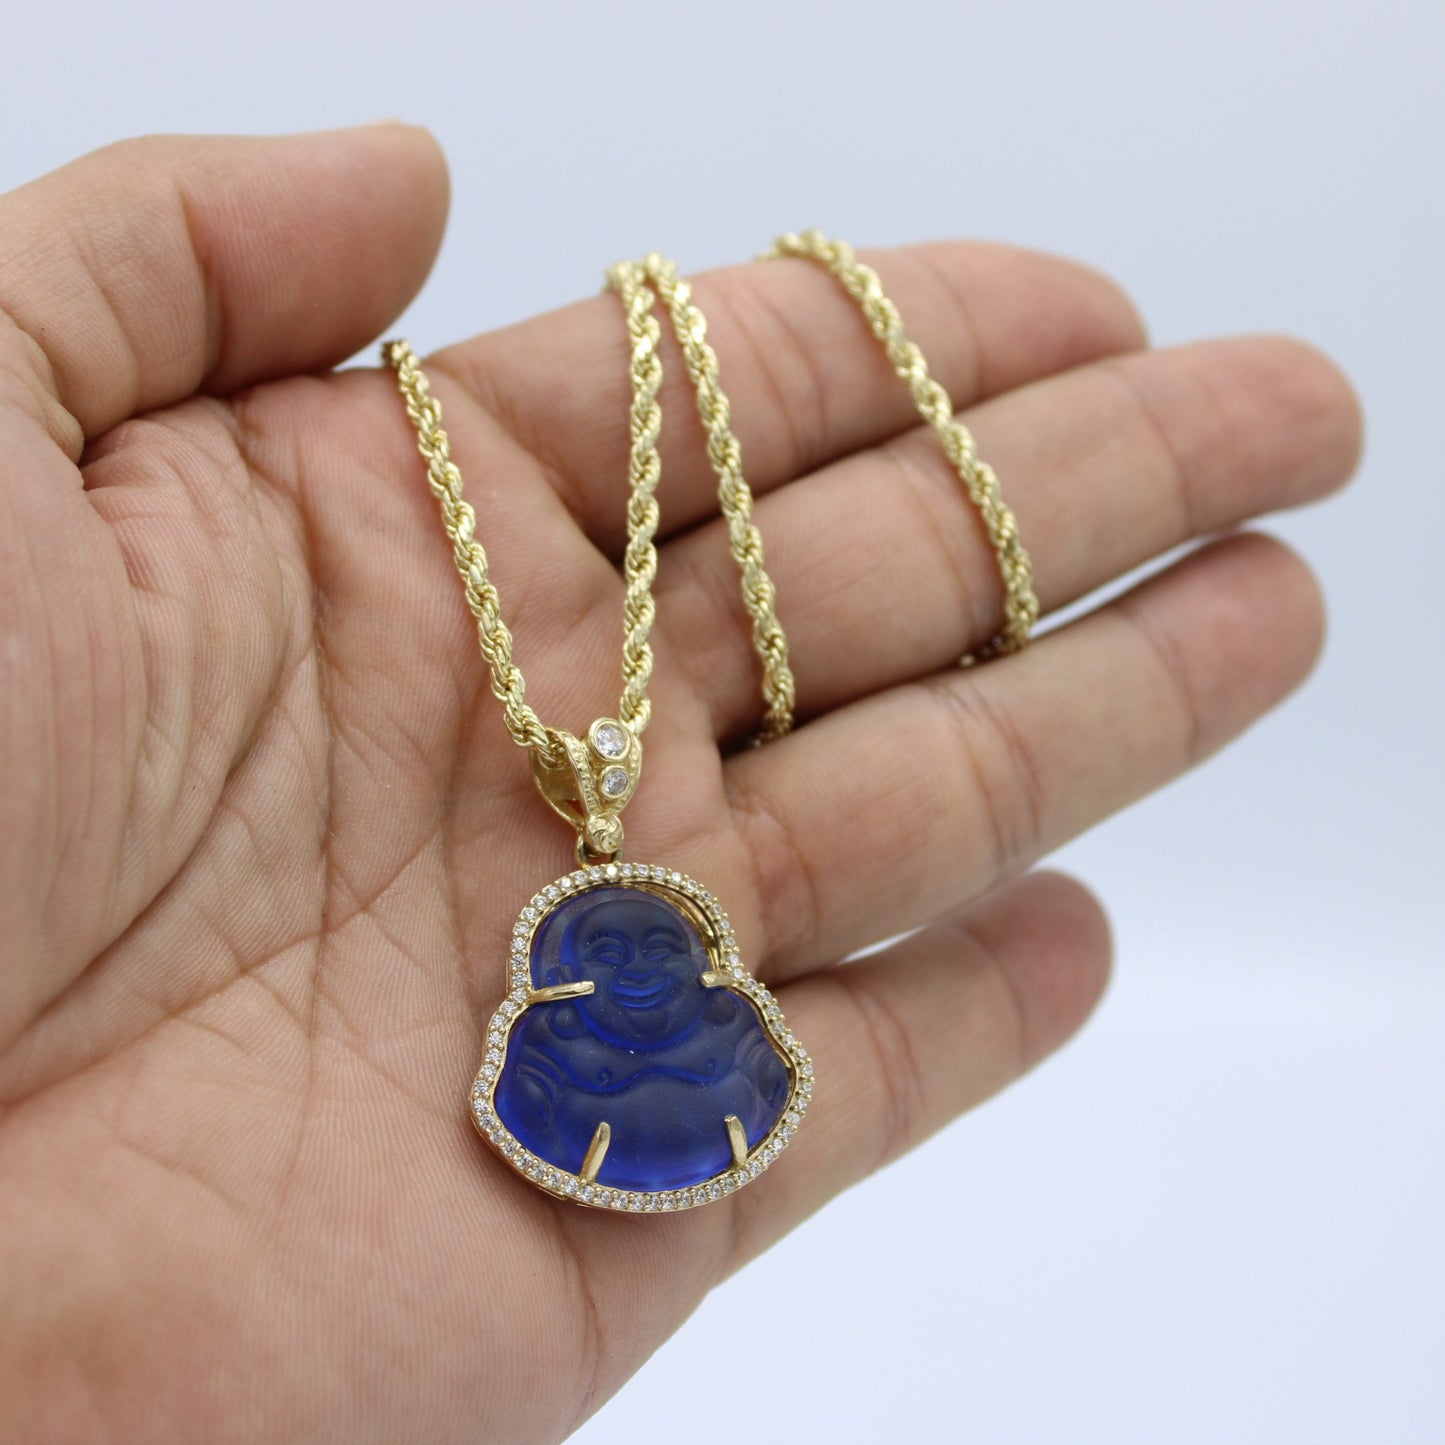 14K Buda (Blue) Pendant Cz Stones with Rope Chain Yellow Gold